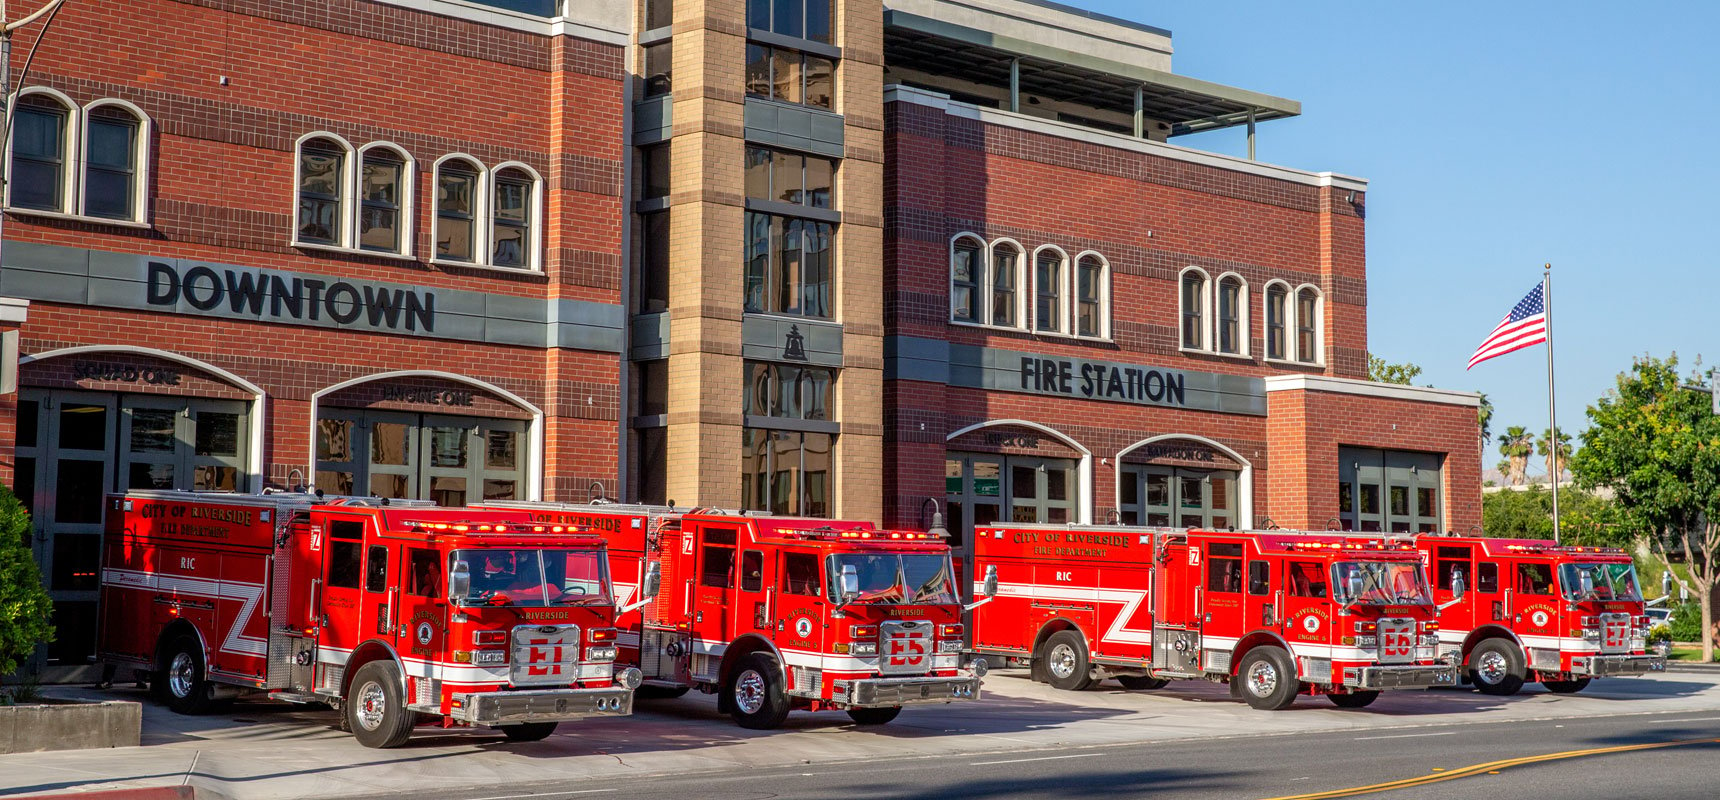 Four red fire trucks are parked outside their bays at a downtown fire station.